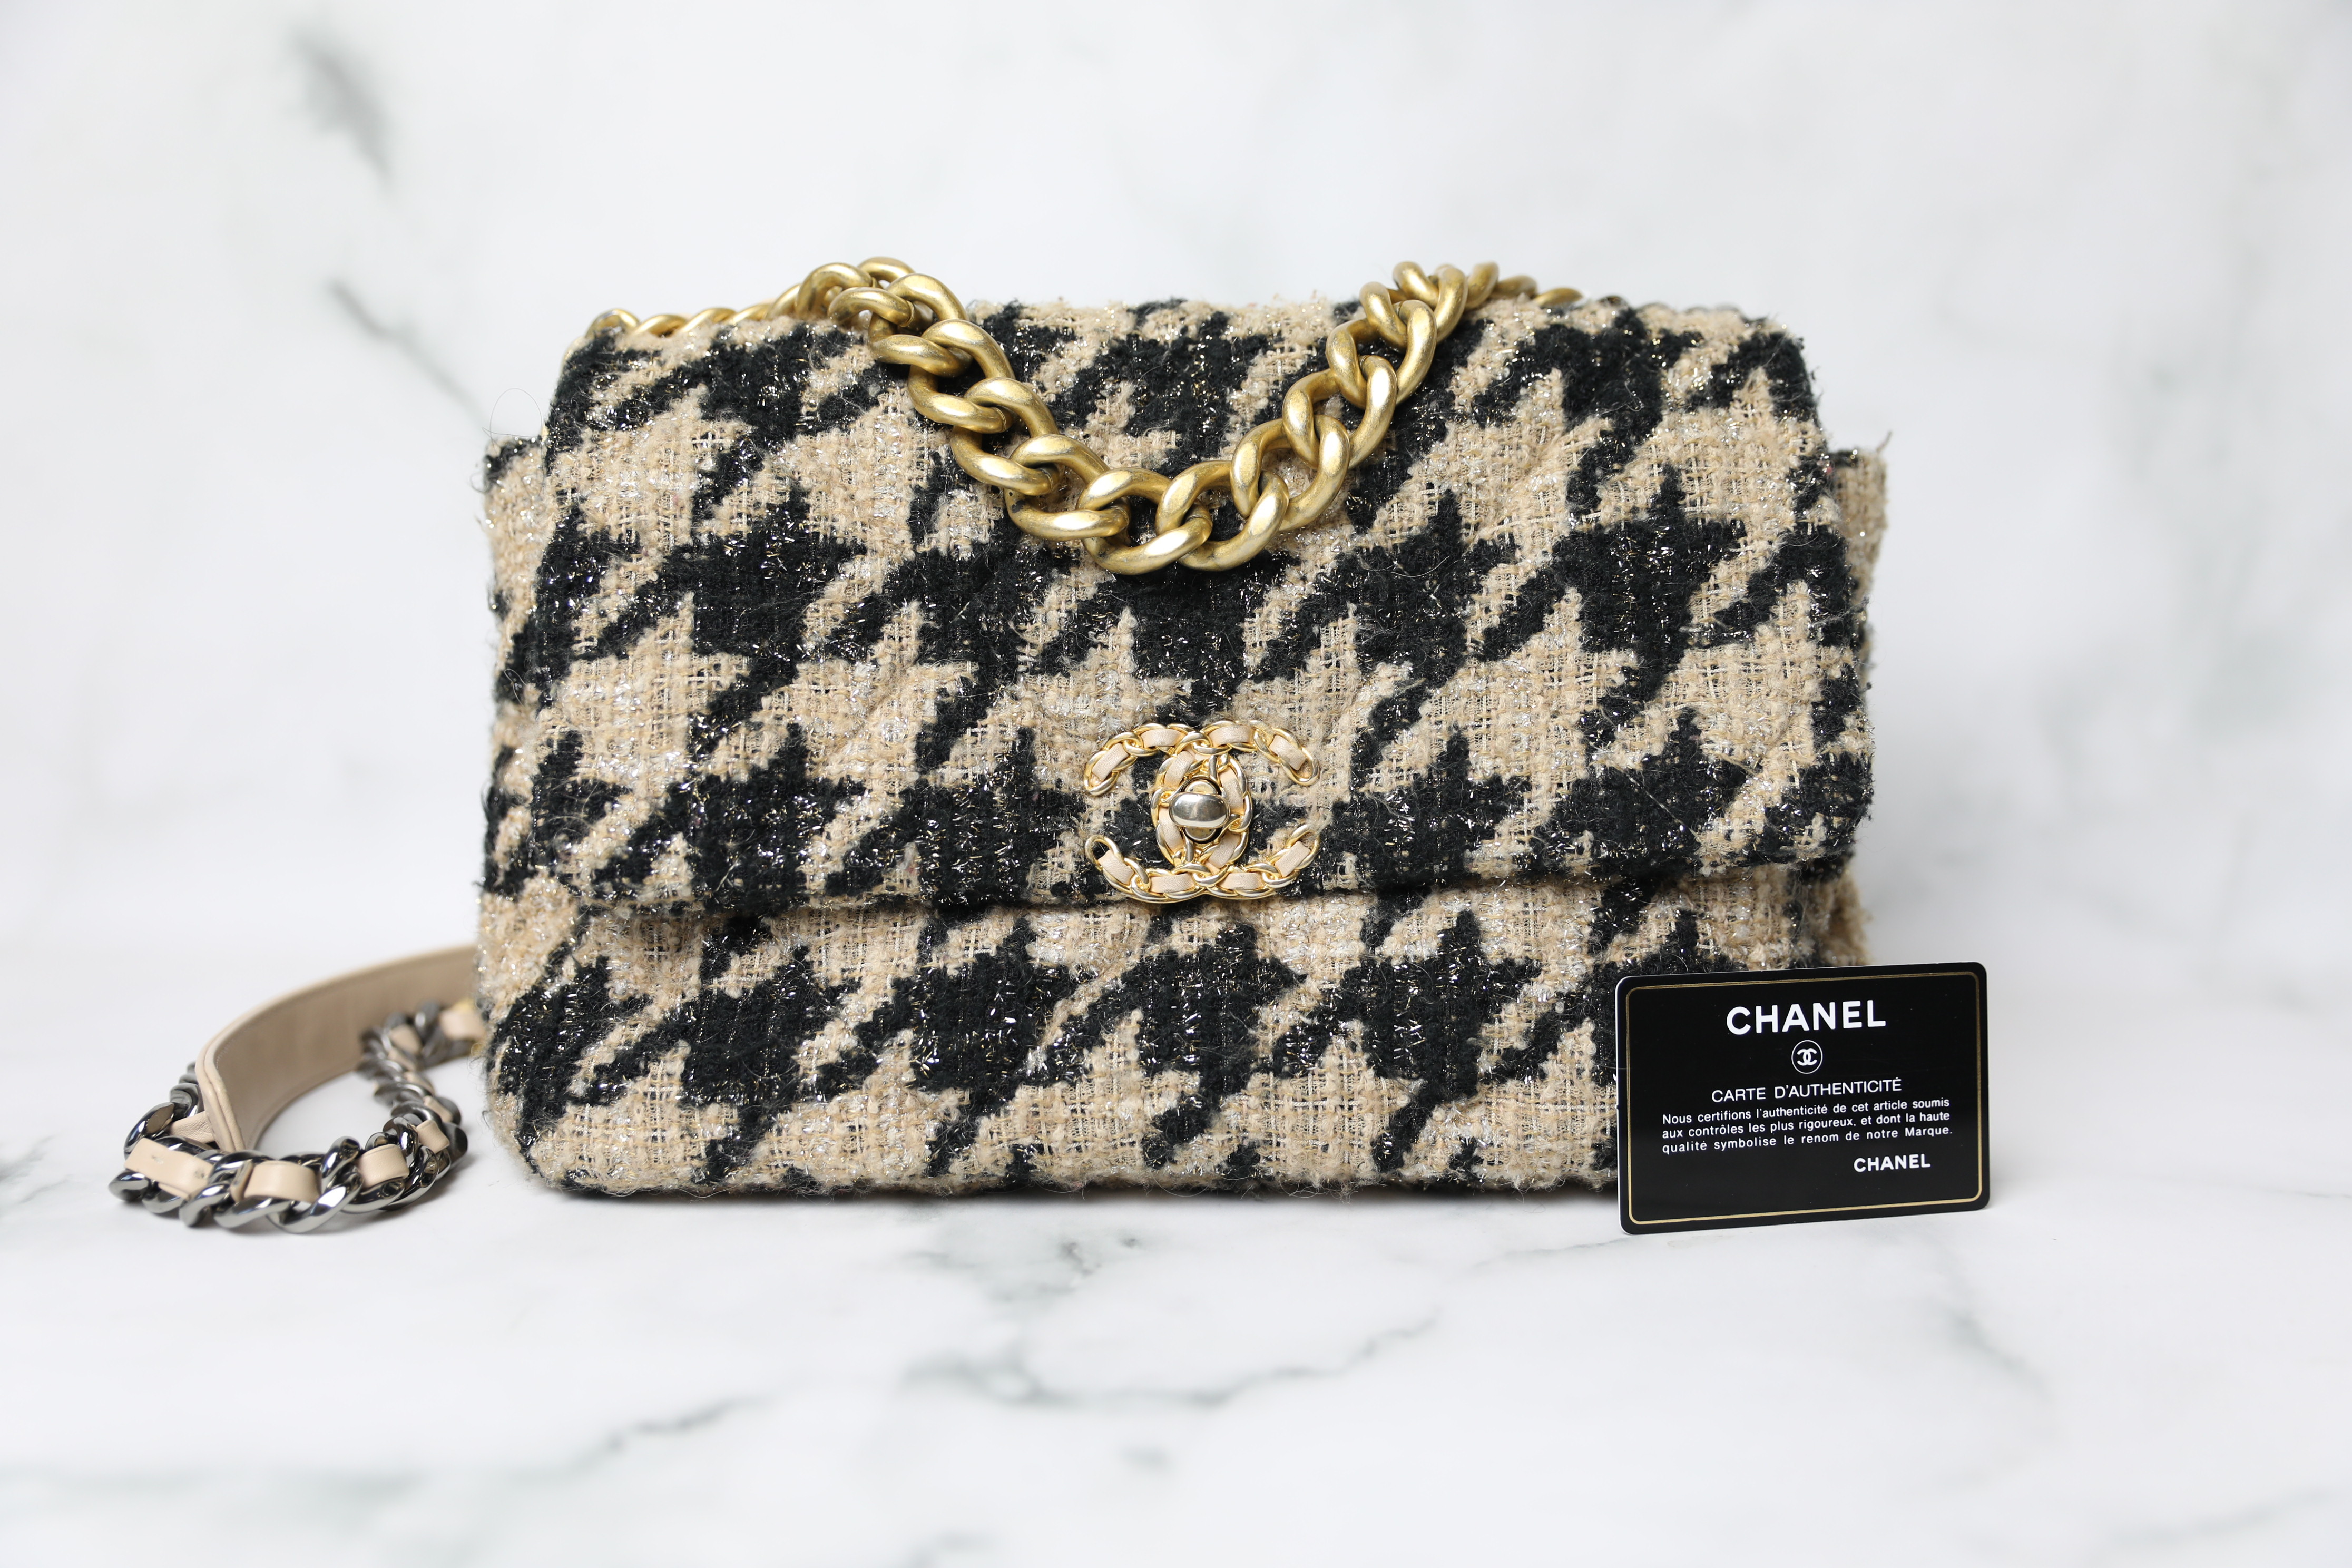 Chanel 19 Maxi, Beige and Black Houndstooth Tweed, Preowned in Box WA001 -  Julia Rose Boston